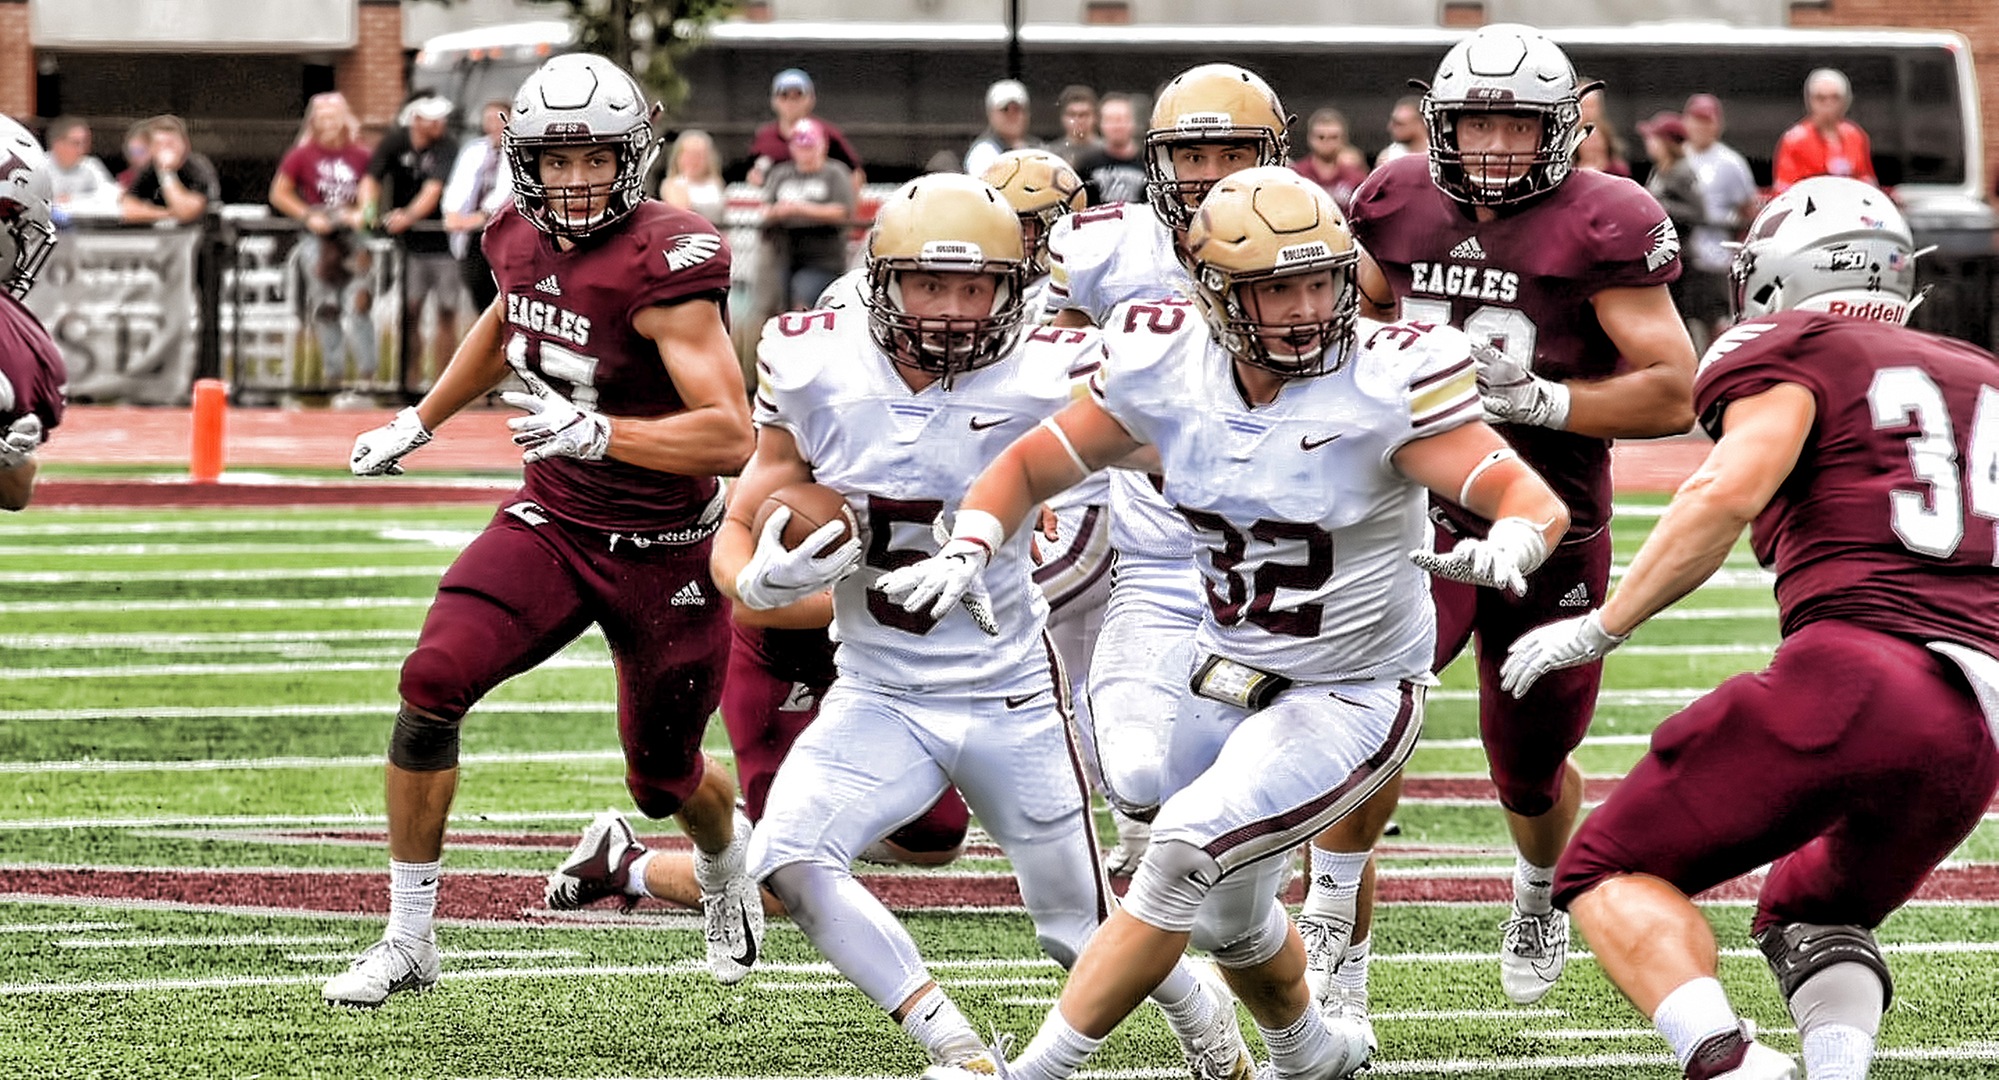 Sophomore Andy Gravdahl weaves his way through the La Crosse defense. He scored one of the two Cobber TDs on the day. (Photo courtesy of Vince Arnold)